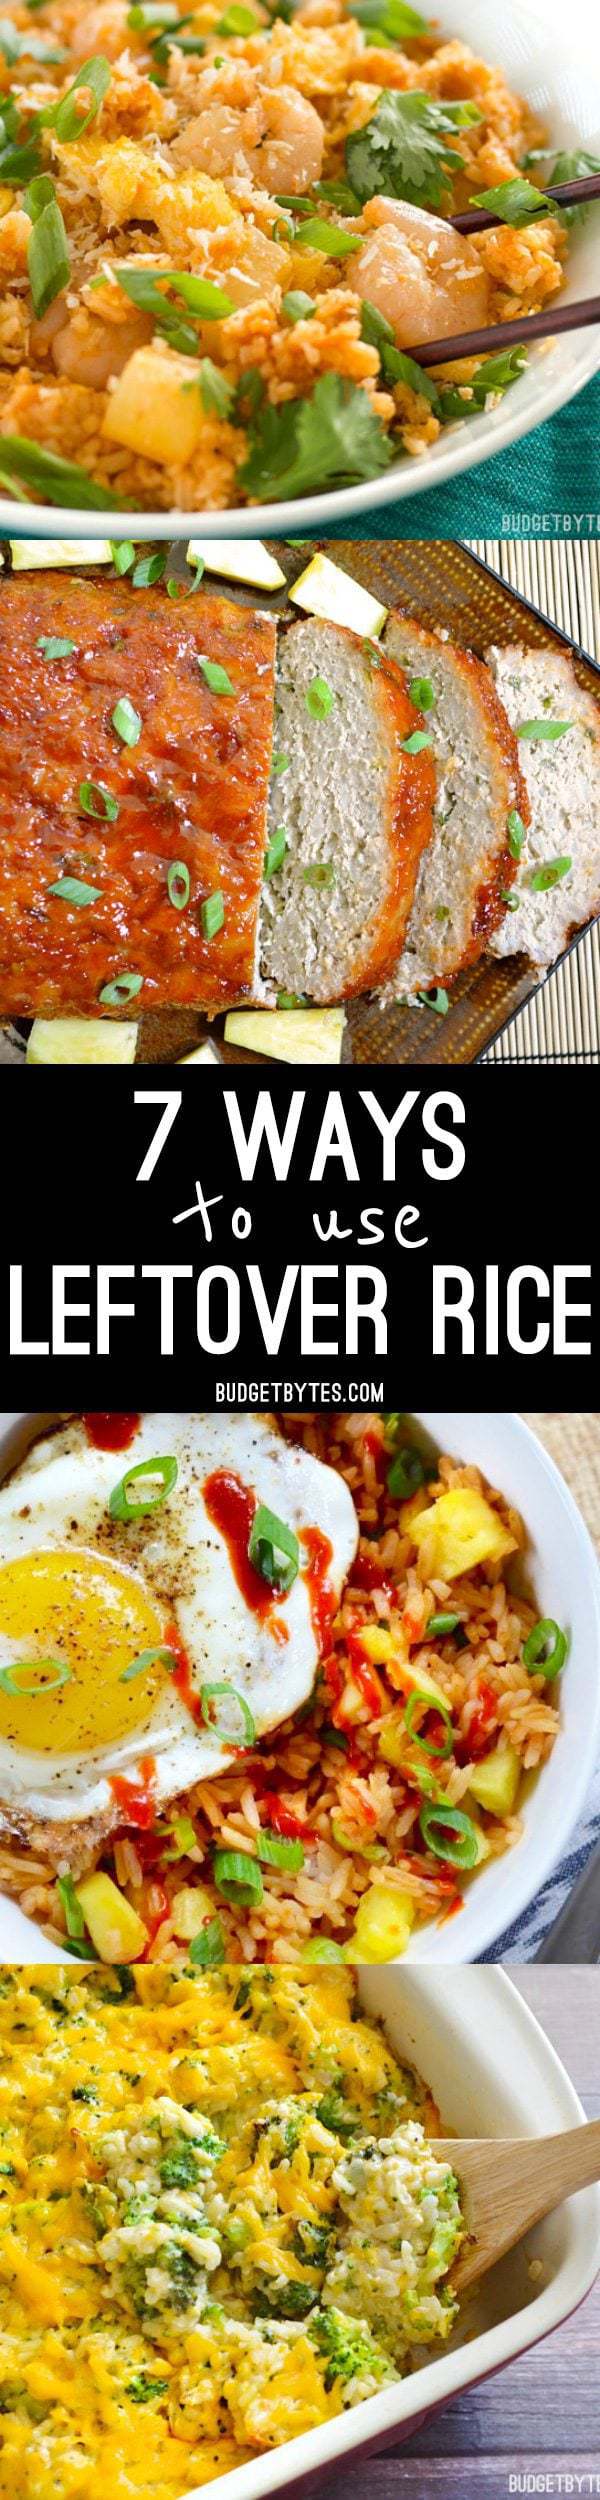 Got leftover rice? Make sure it doesn't go to waste by using one of these 7 ways to use leftover rice. BudgetBytes.com